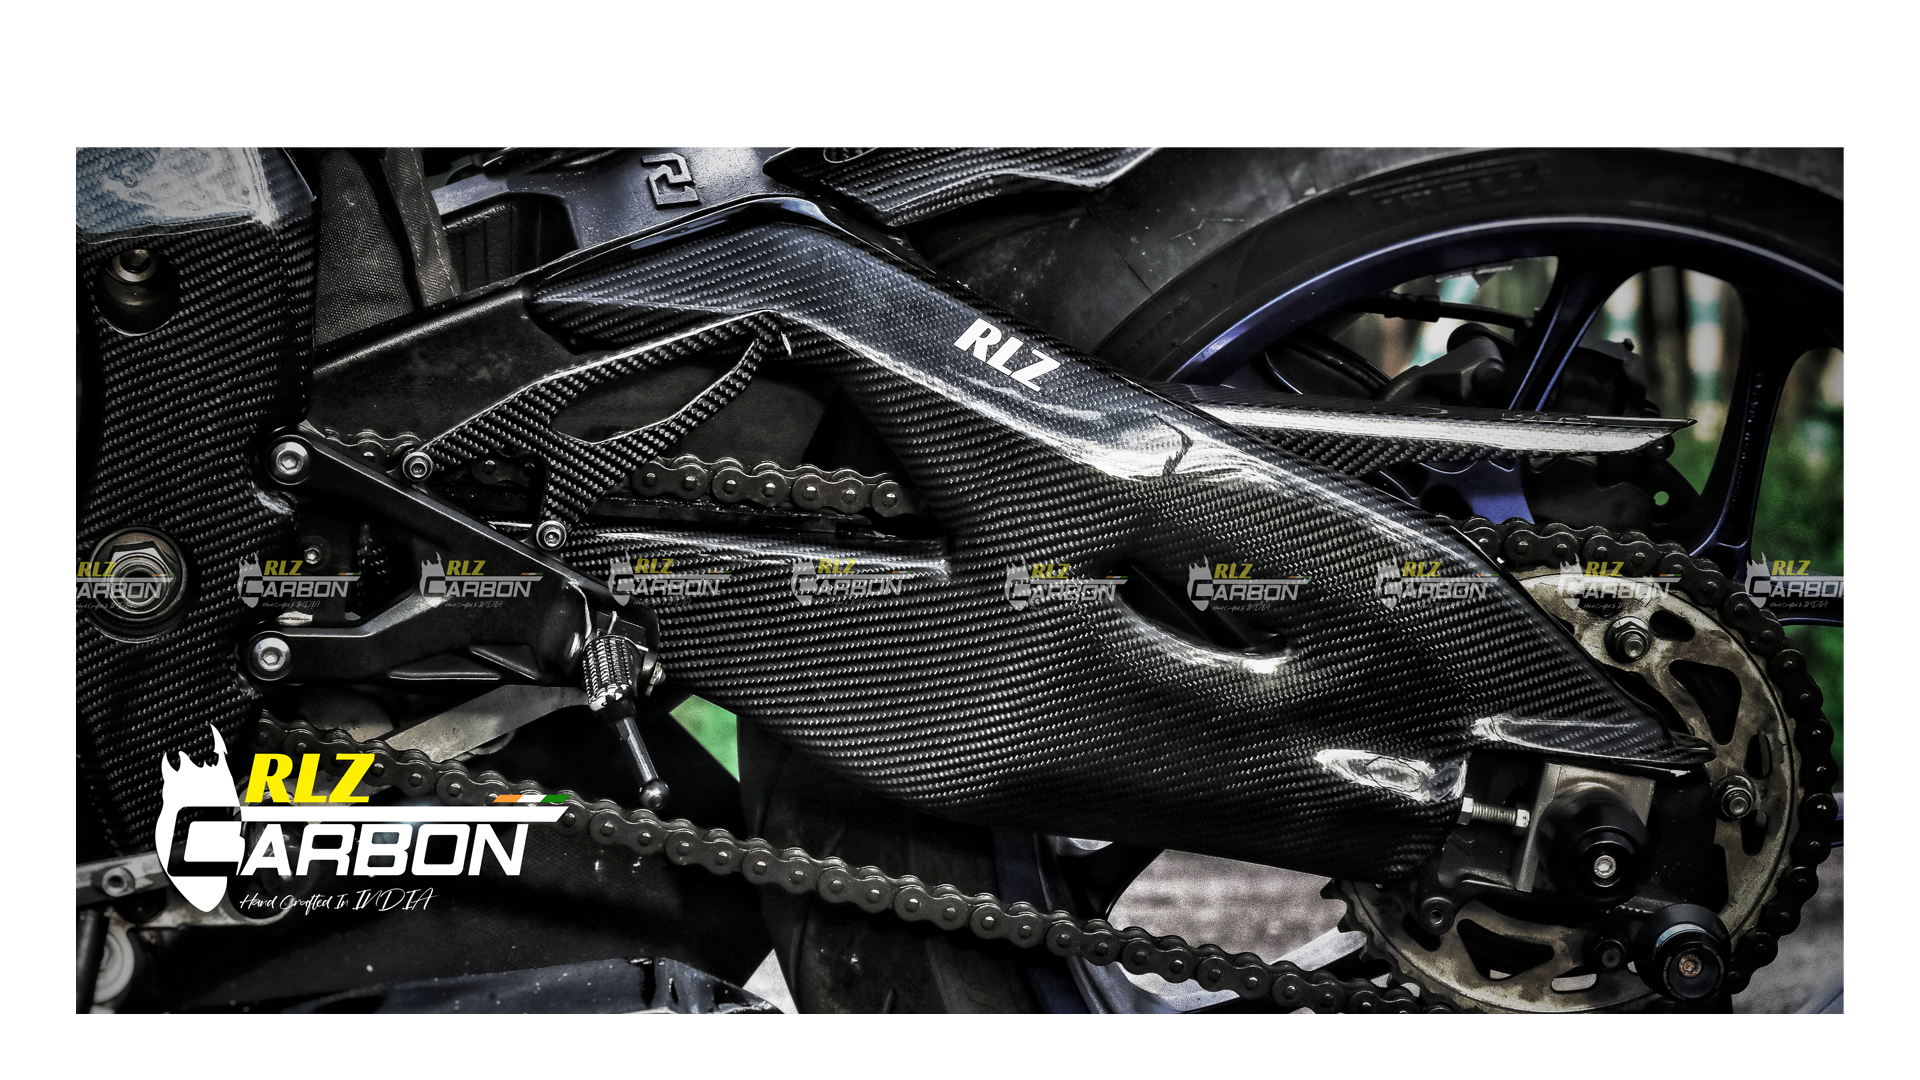 Carbon Fiber Swing Arm Covers for Yamaha R1 2015+